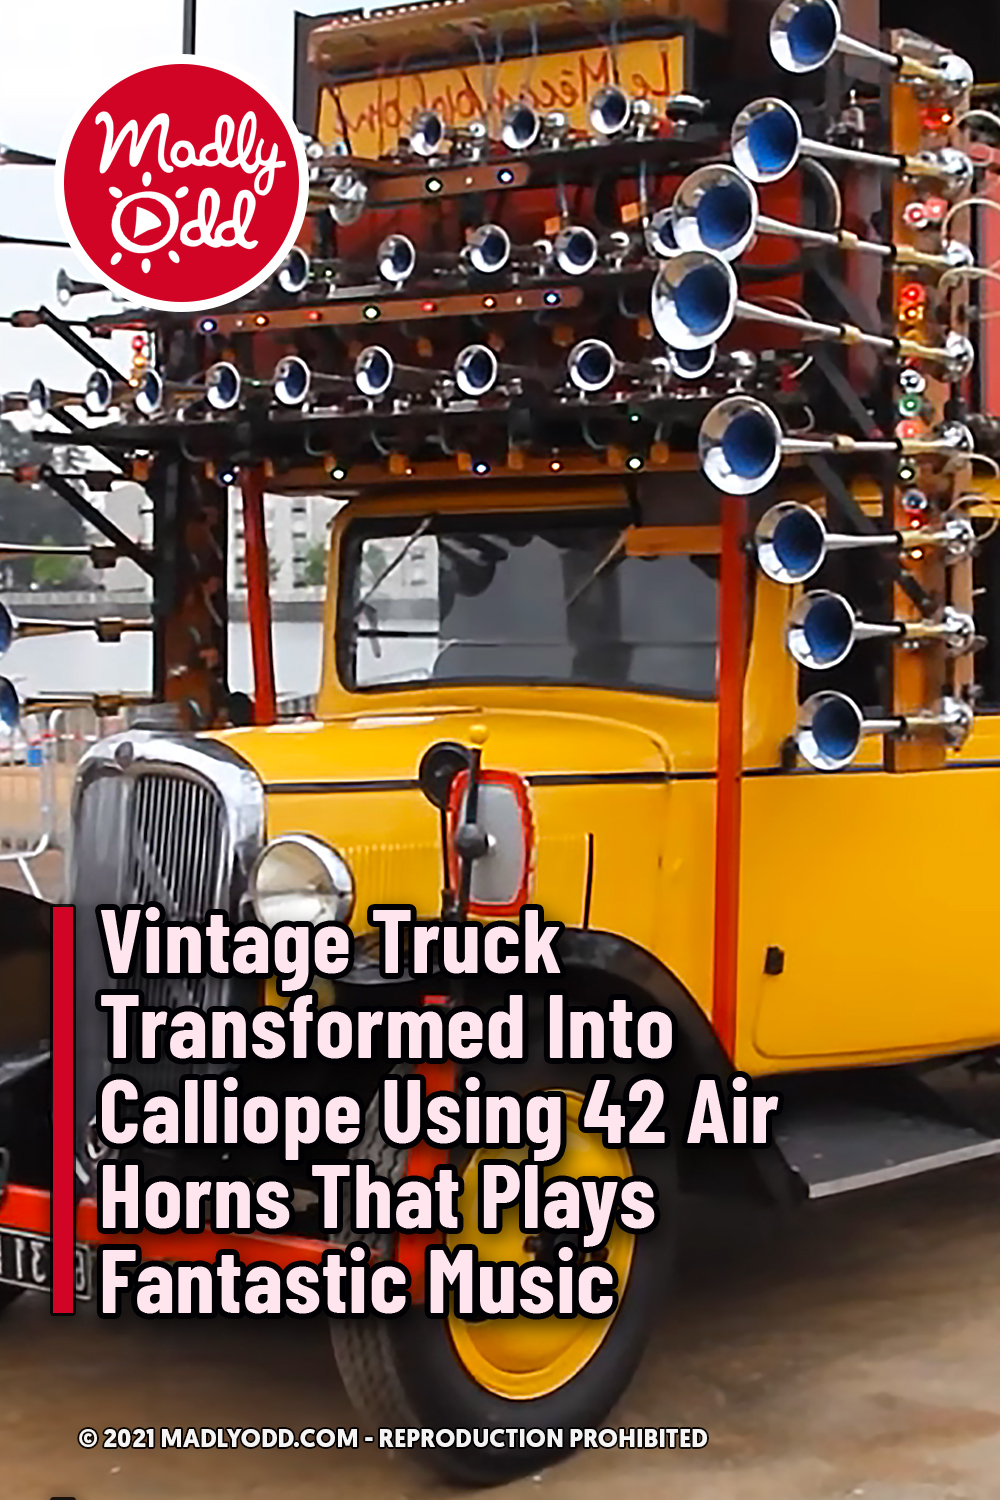 Vintage Truck Transformed Into Calliope Using 42 Air Horns That Plays Fantastic Music